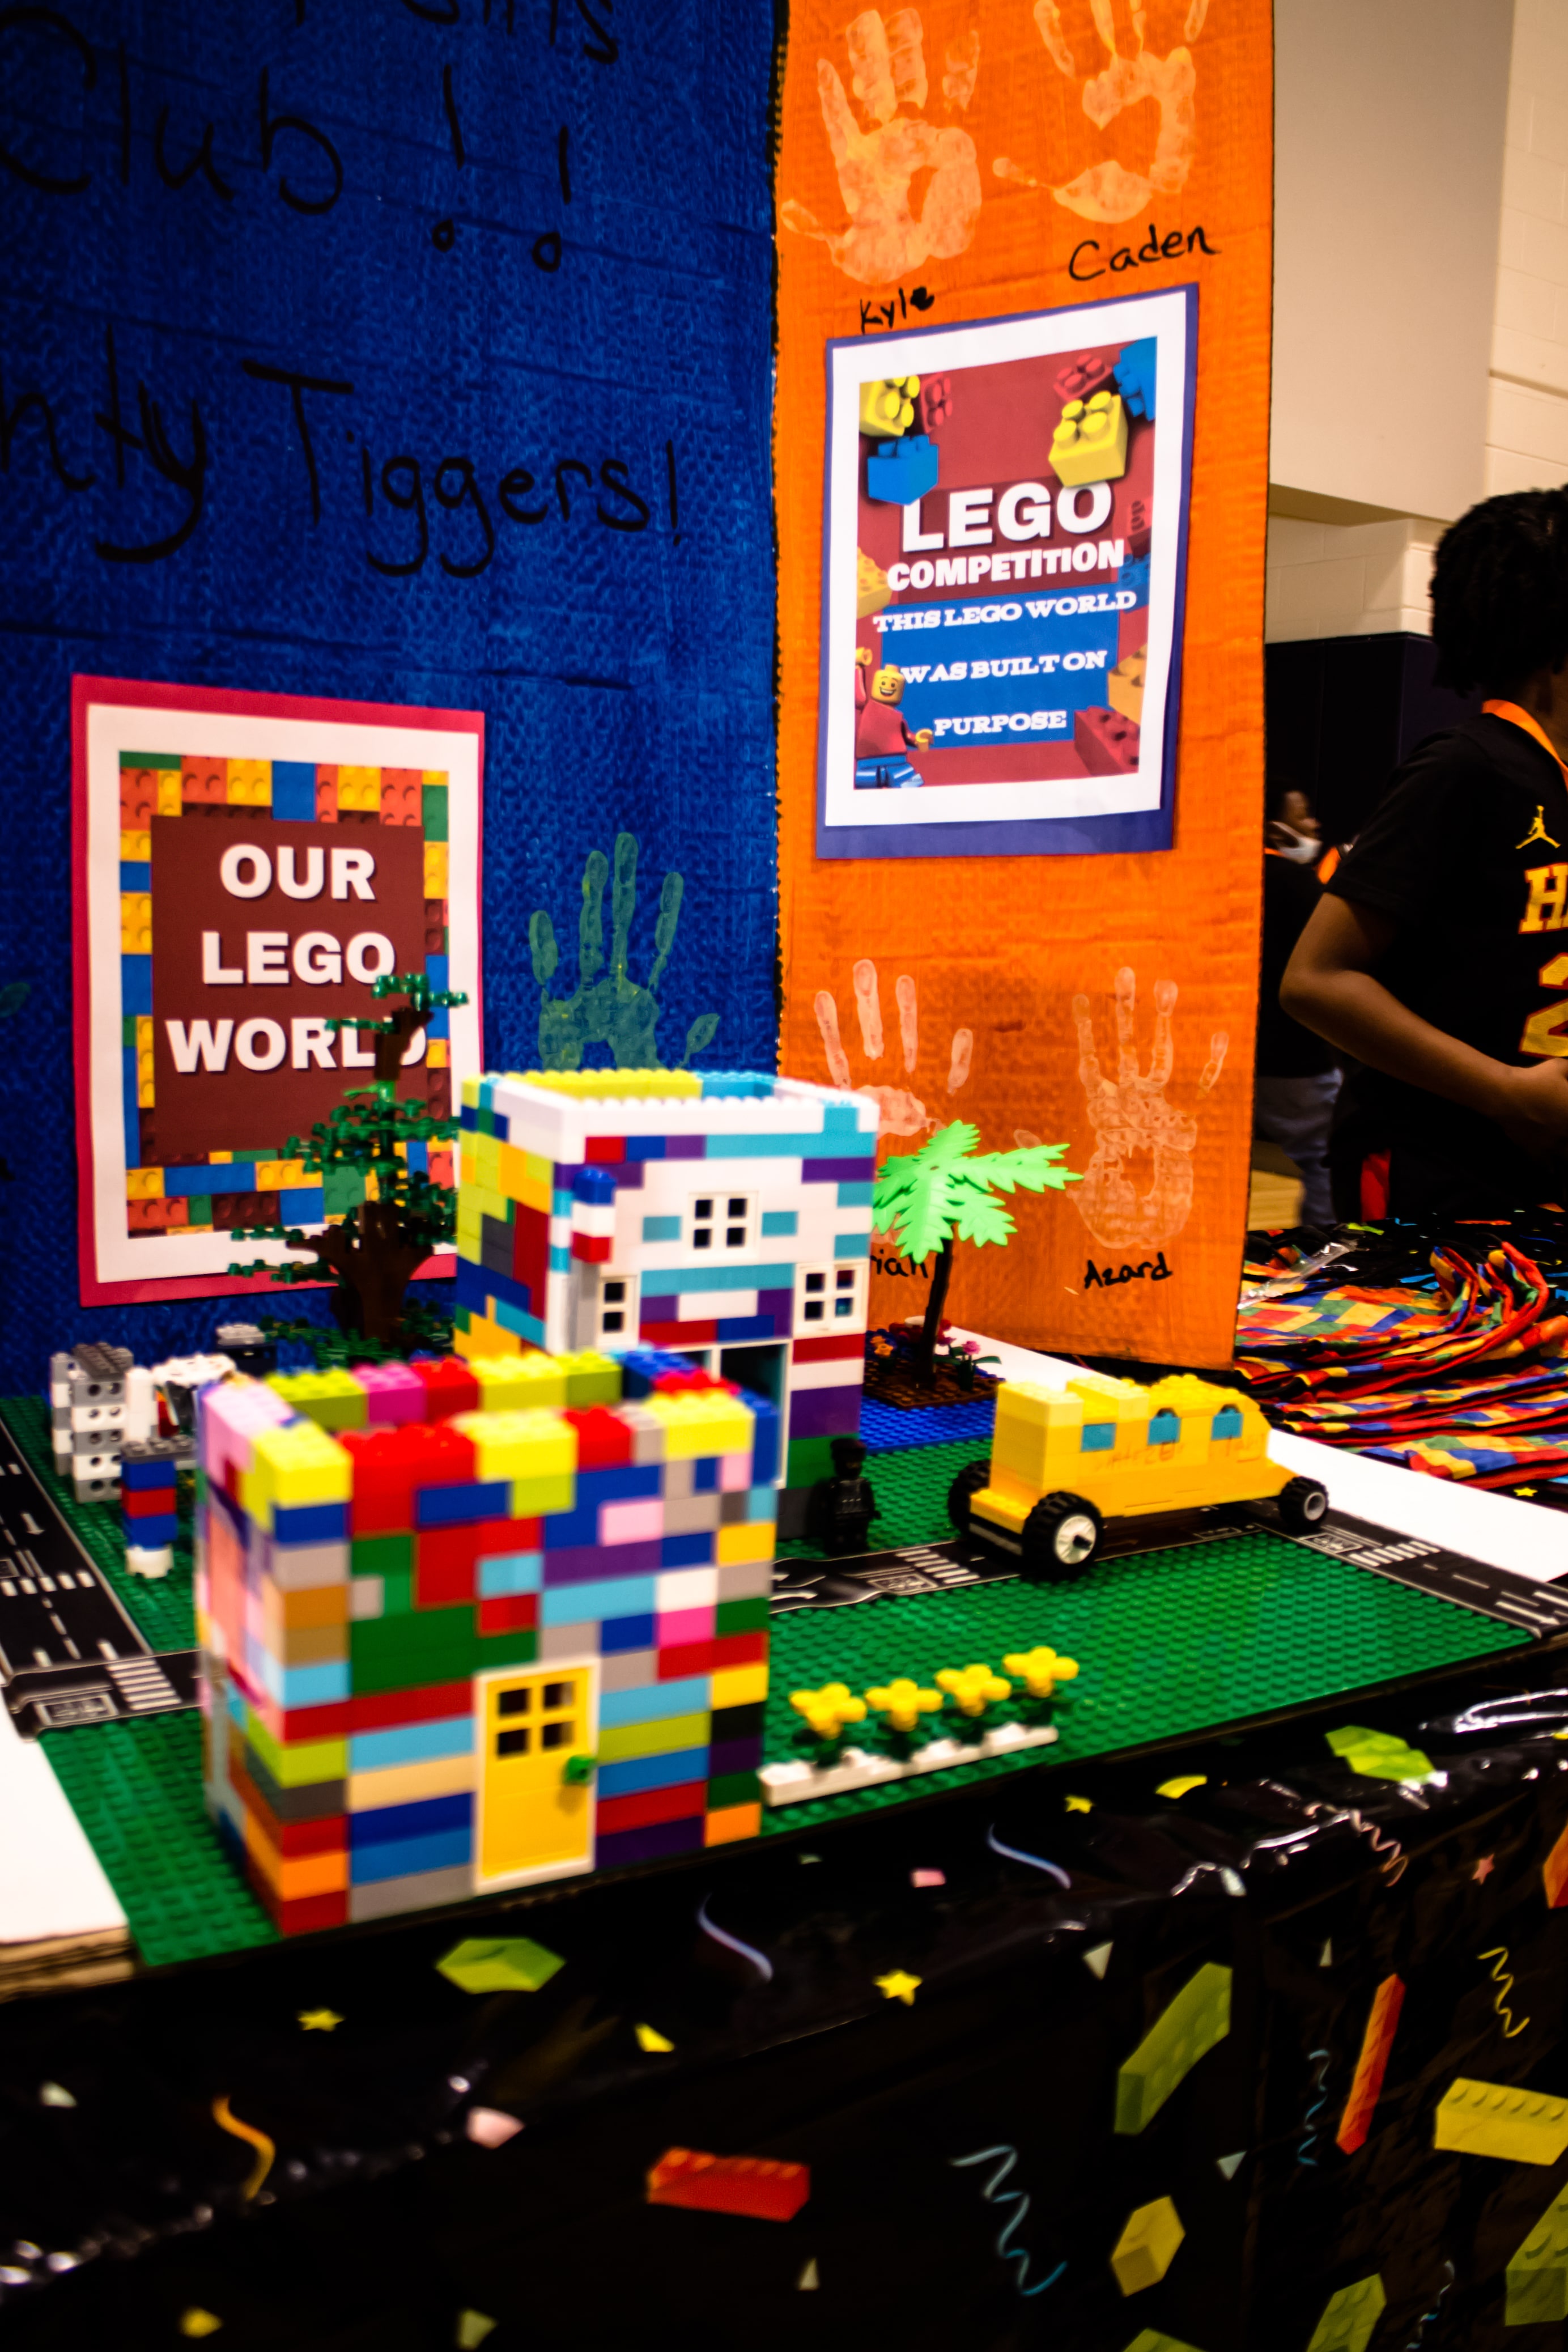 Warren Warriers Win Honors in Inaugural Full S.T.E.A.M. Ahead LEGO Build Competition - & Girls Clubs of Metro Atlanta